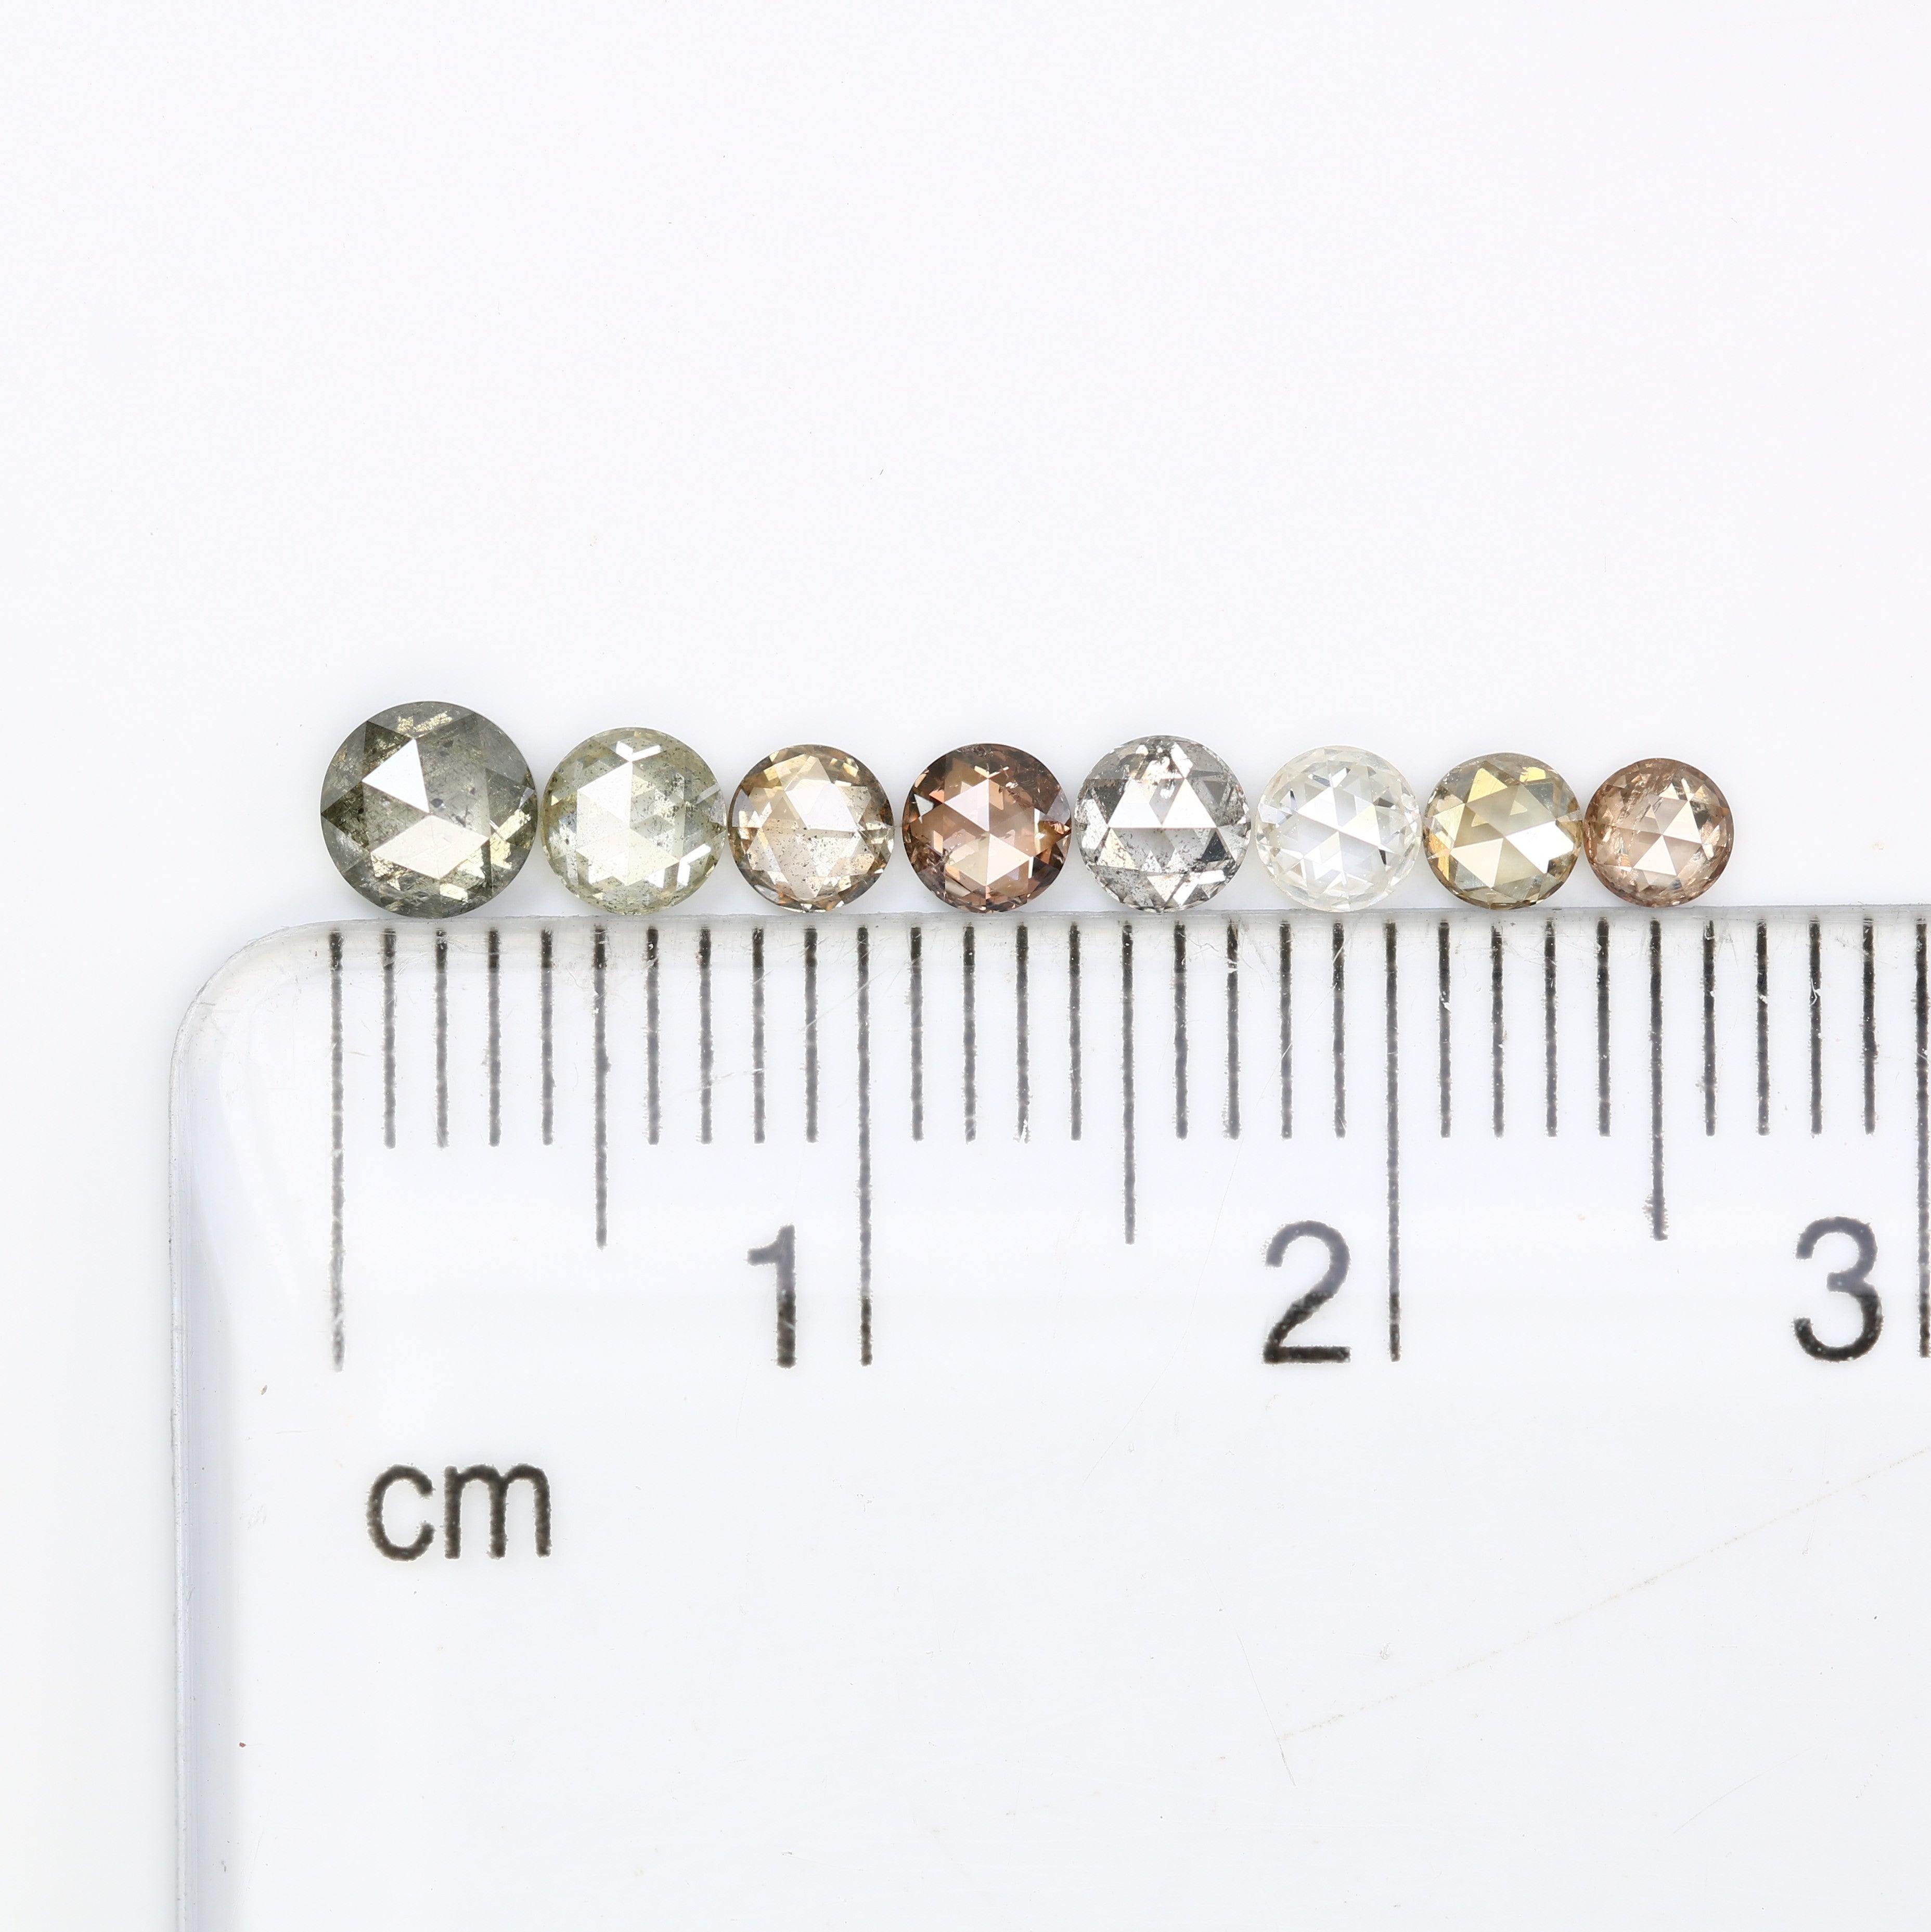 1.23 Carat Fancy Color Loose Round Rose Cut Diamond For Wedding Ring